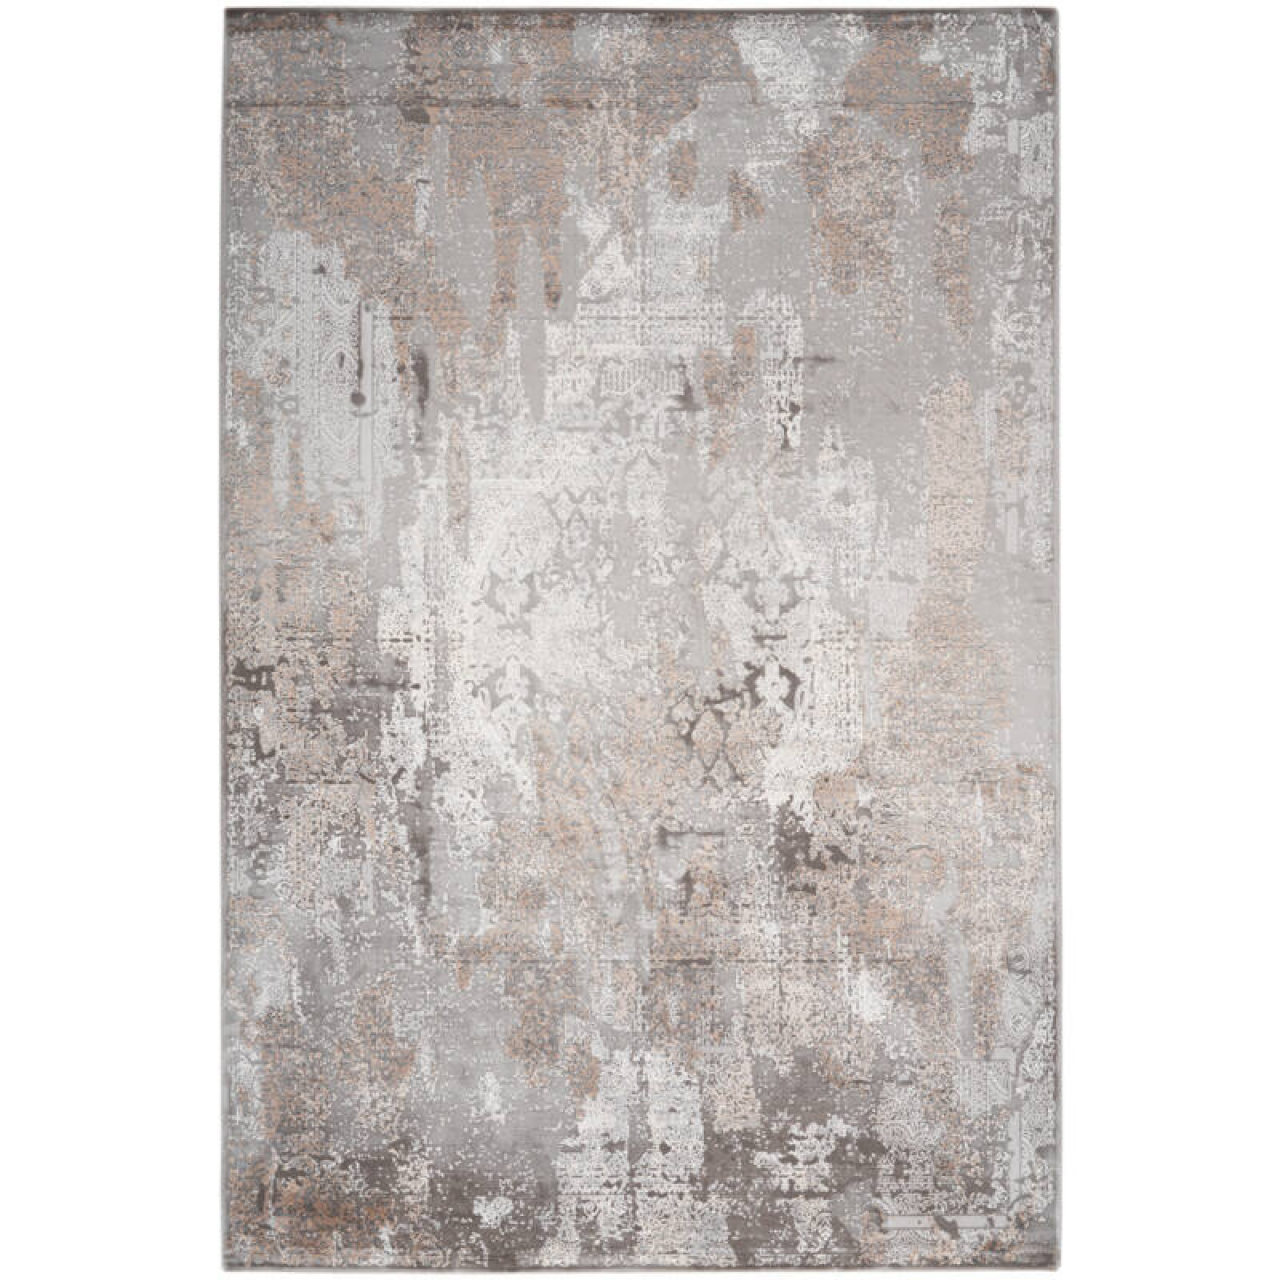 Obsession Haute Couture Jewel 951 Taupe szőnyeg-120x170